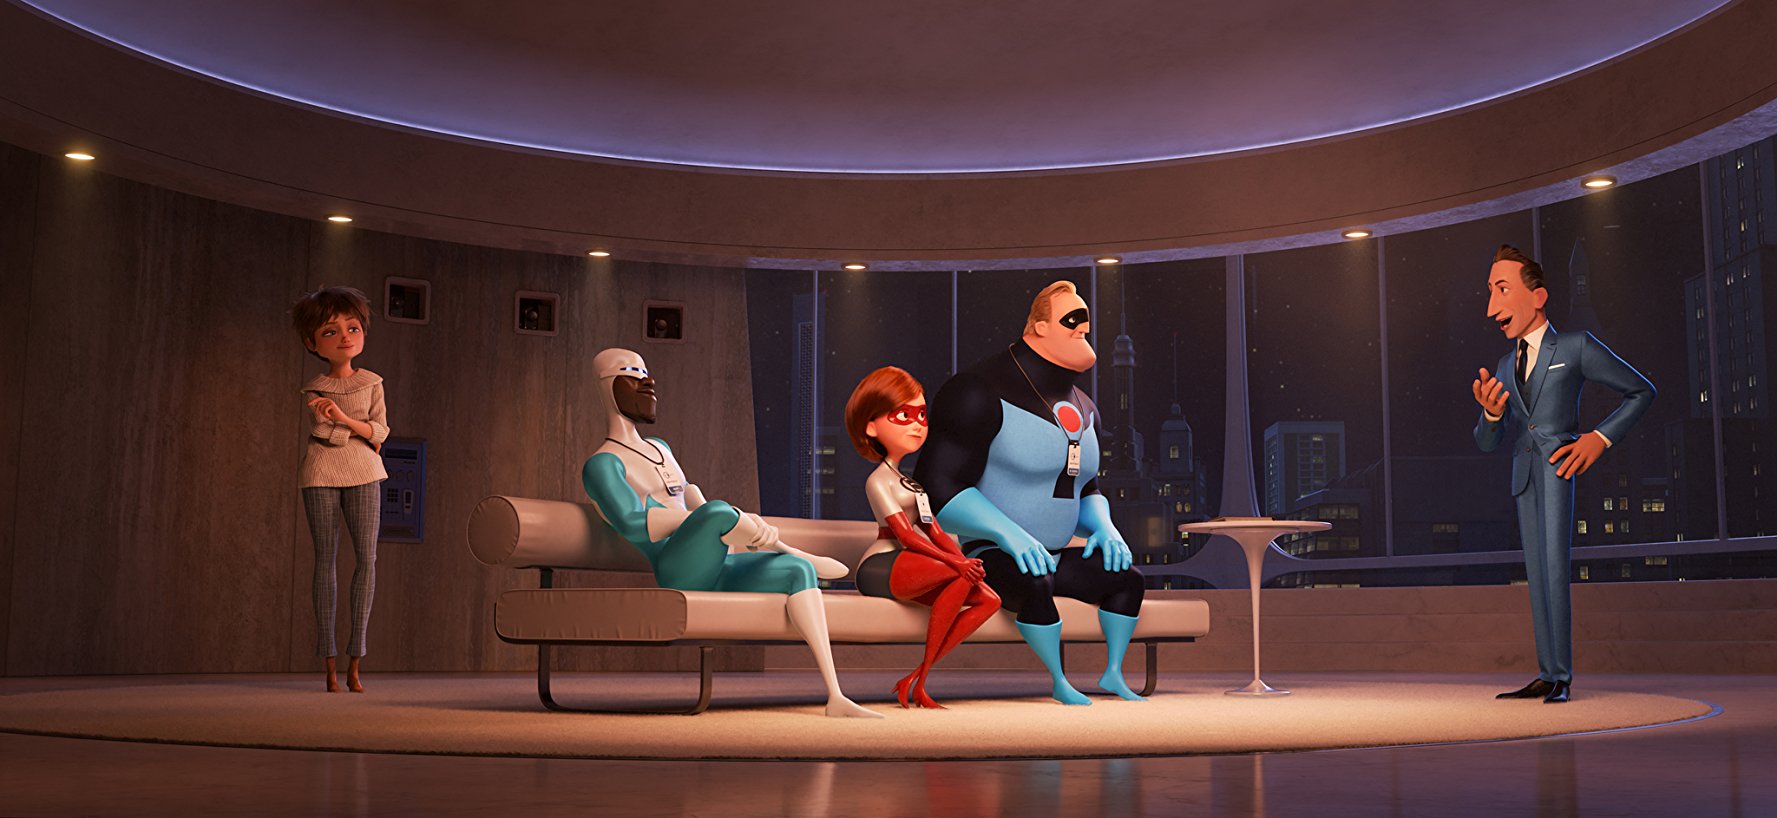 ‘Incredibles 2’ is an exciting adventure that lives up to the expectations